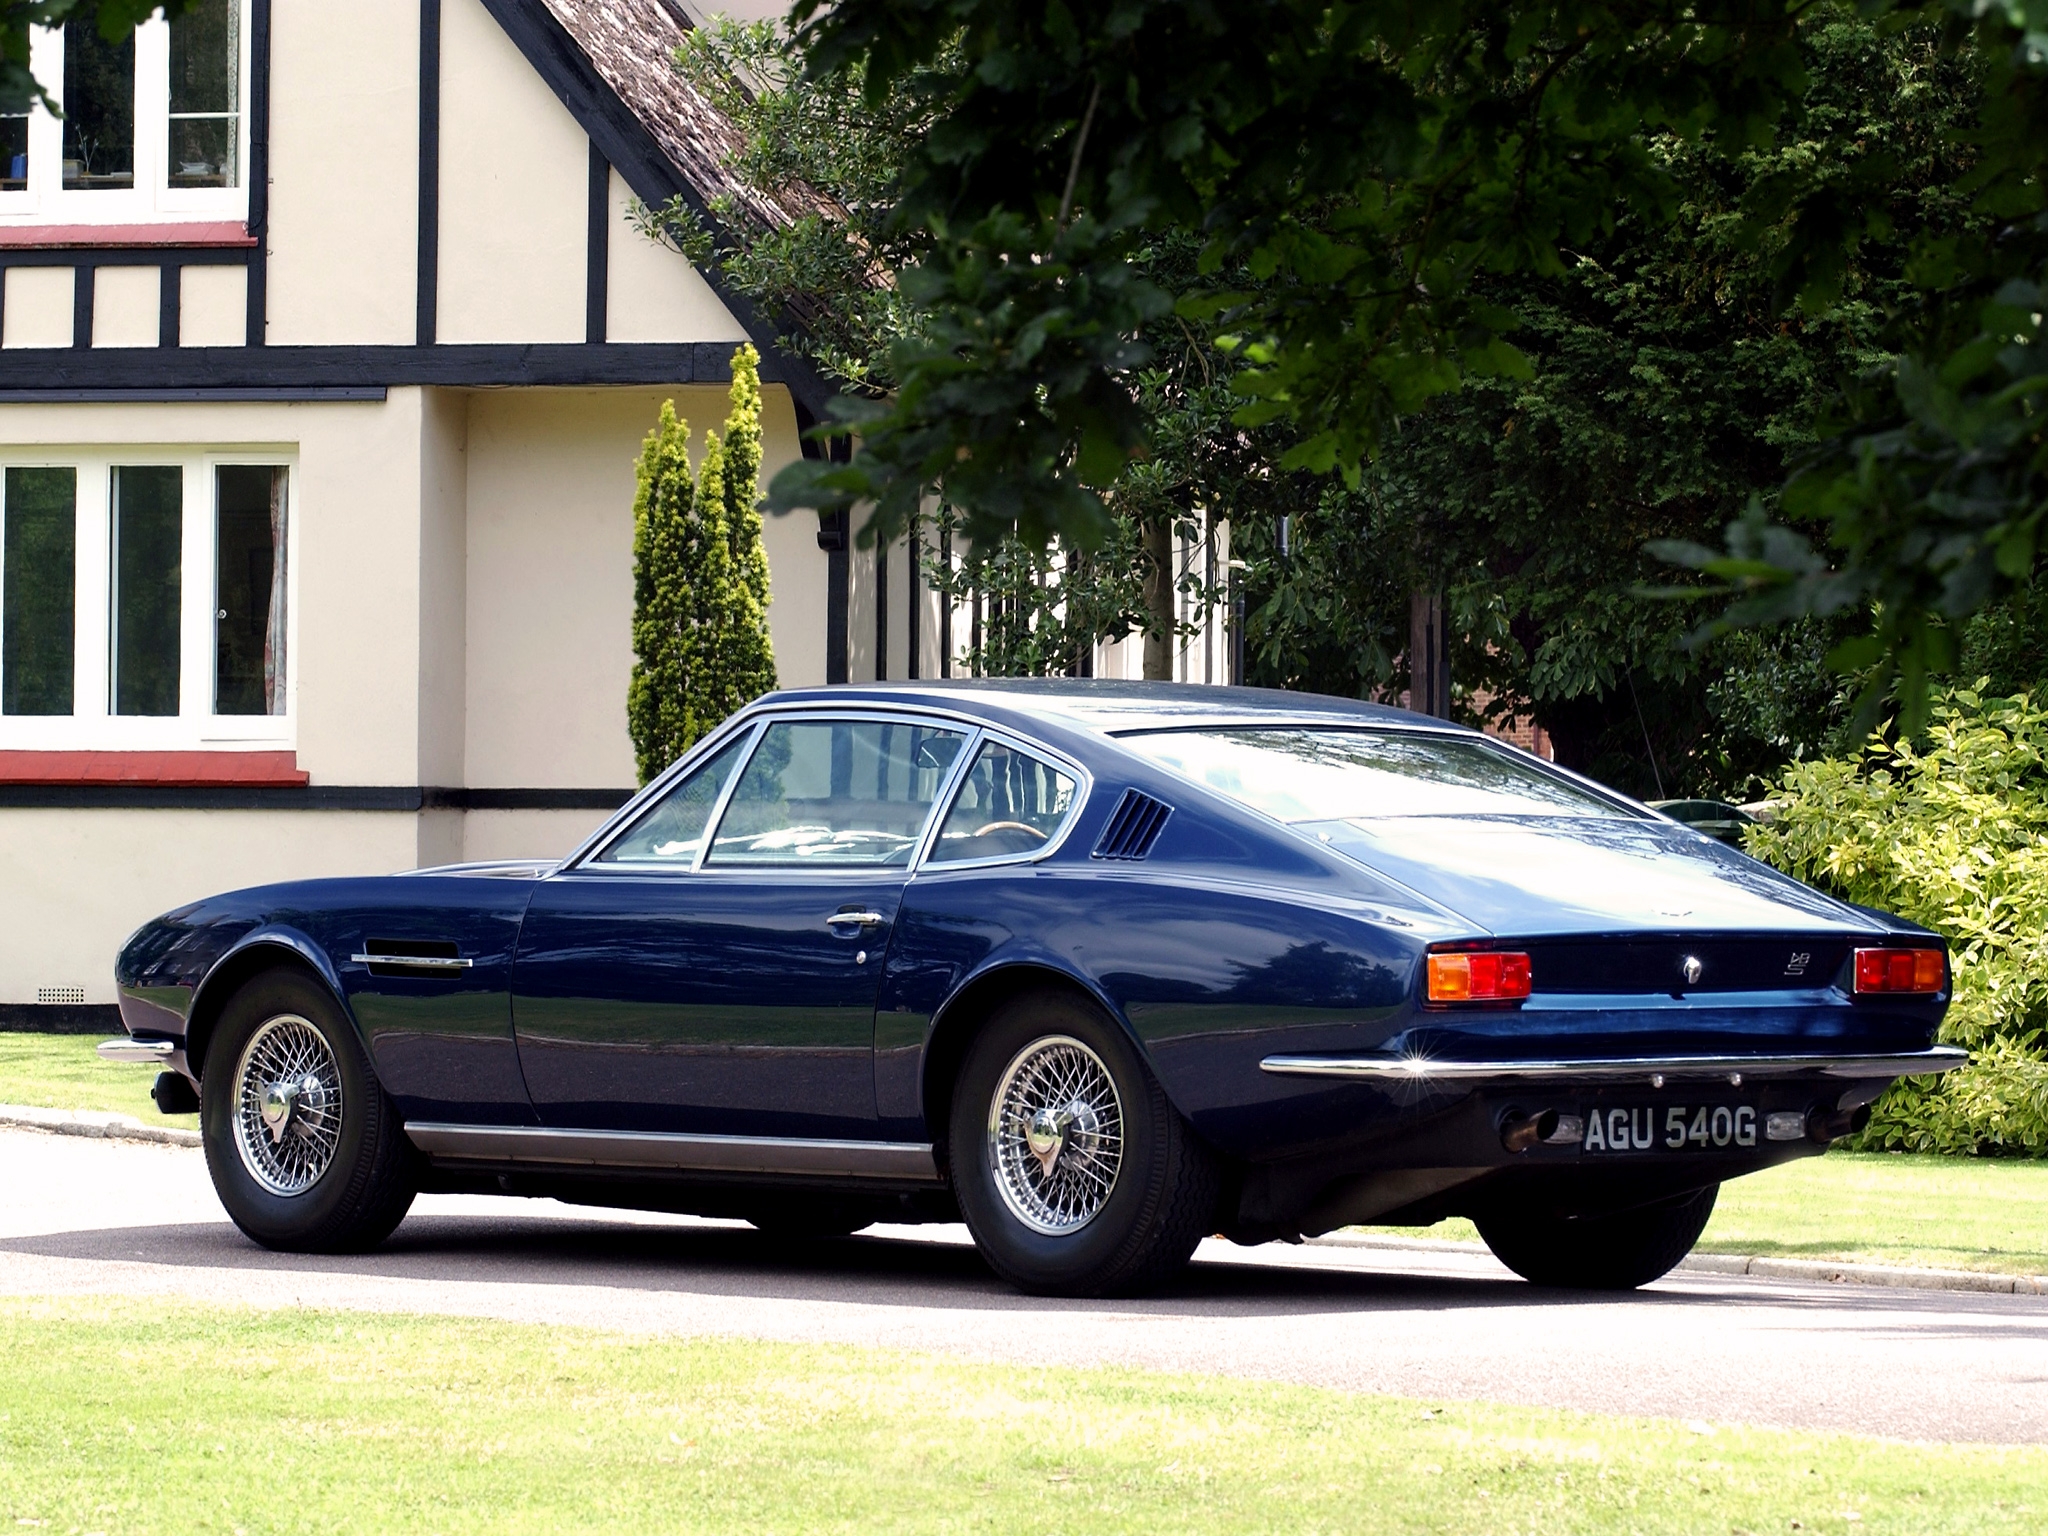 house, trees, aston martin, cars, blue, side view, style, 1967, retro, dbs